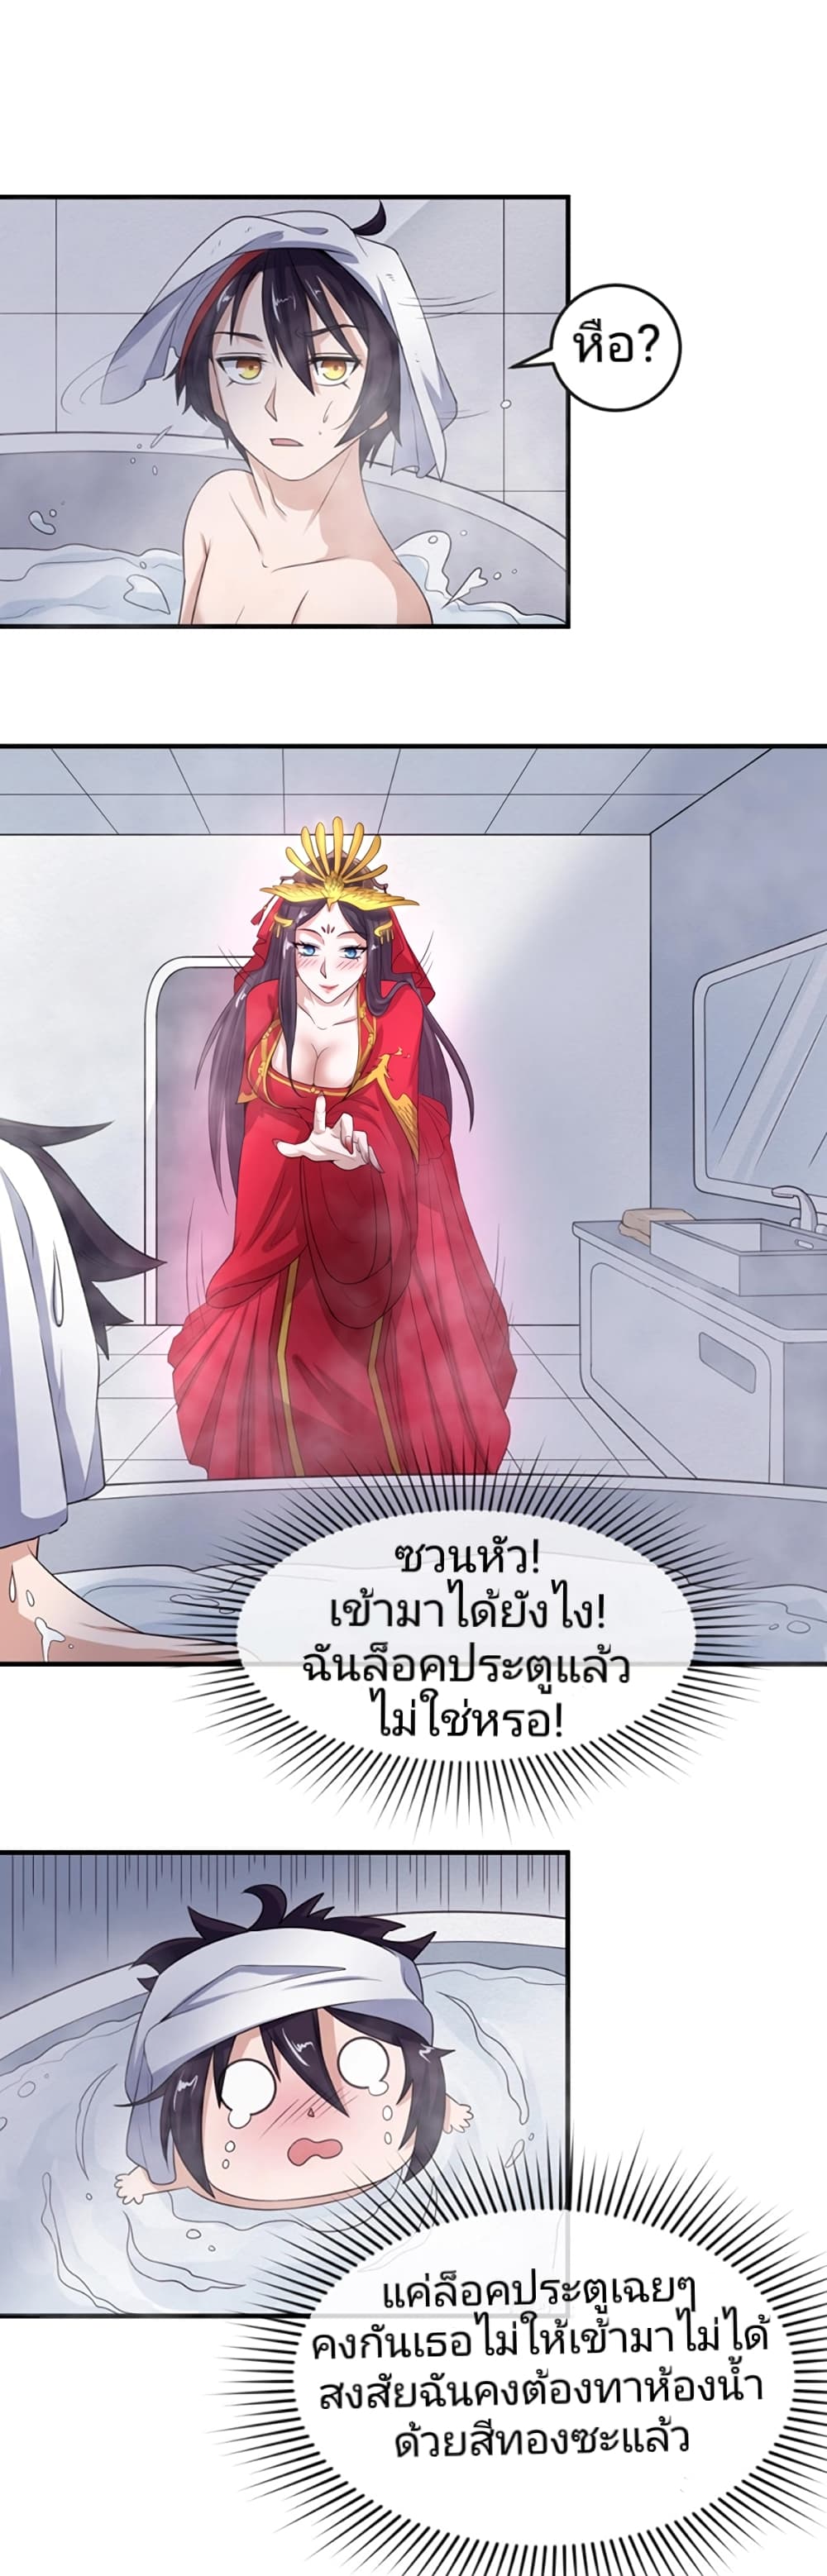 The Age of Ghost Spirits à¸à¸­à¸à¸à¸µà¹ 20 (19)